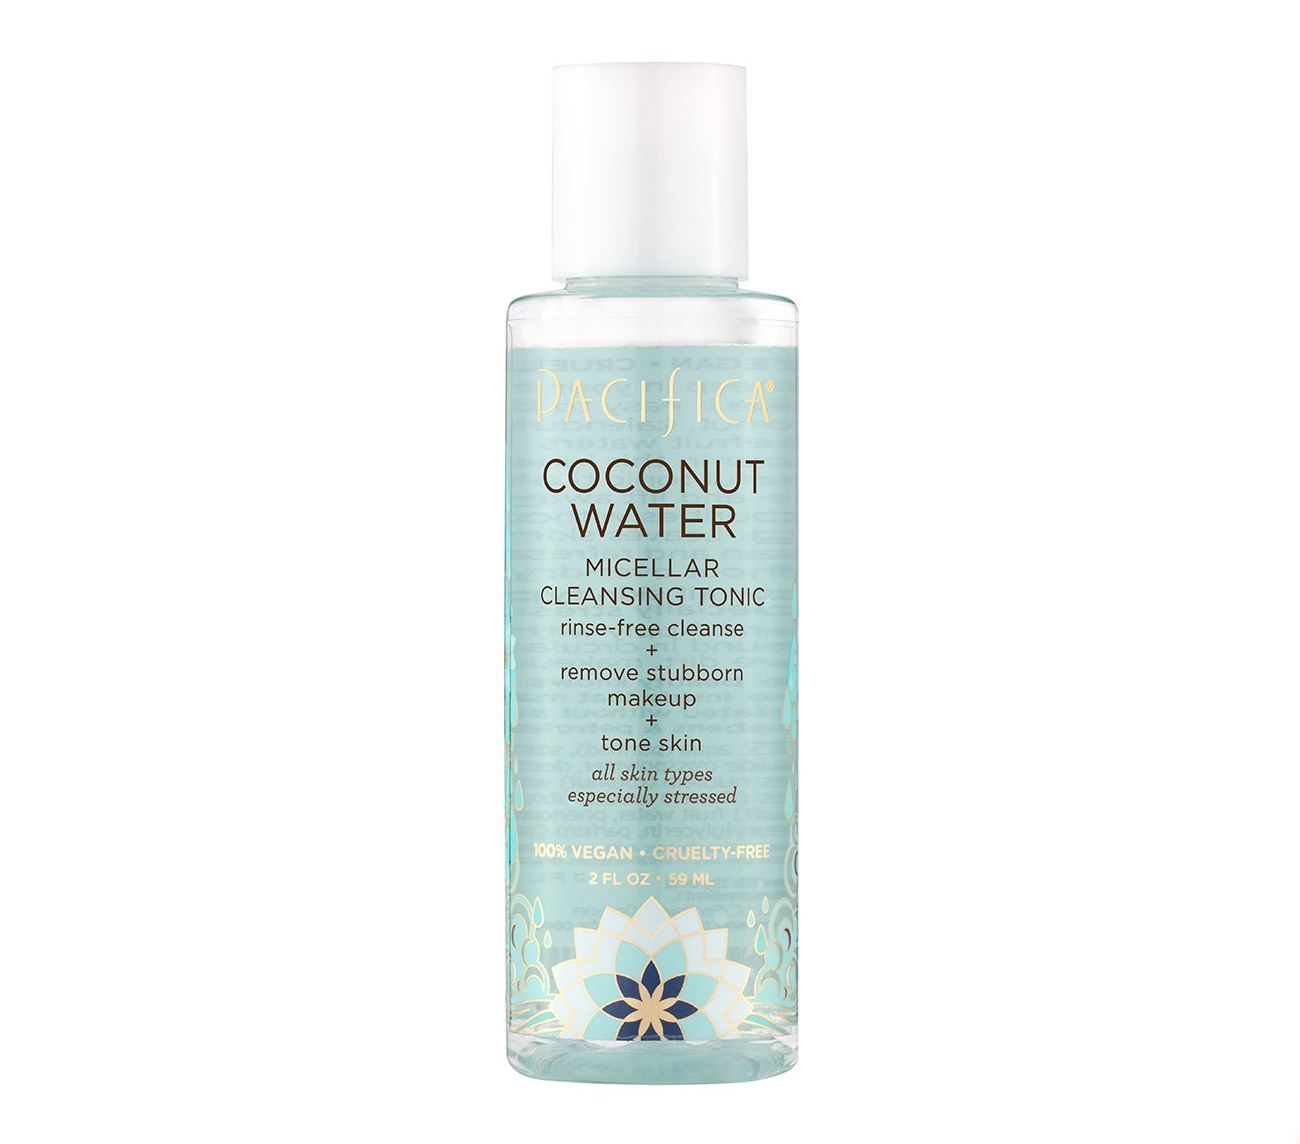 Pacifica Coconut Water Micellar Cleansing Tonic